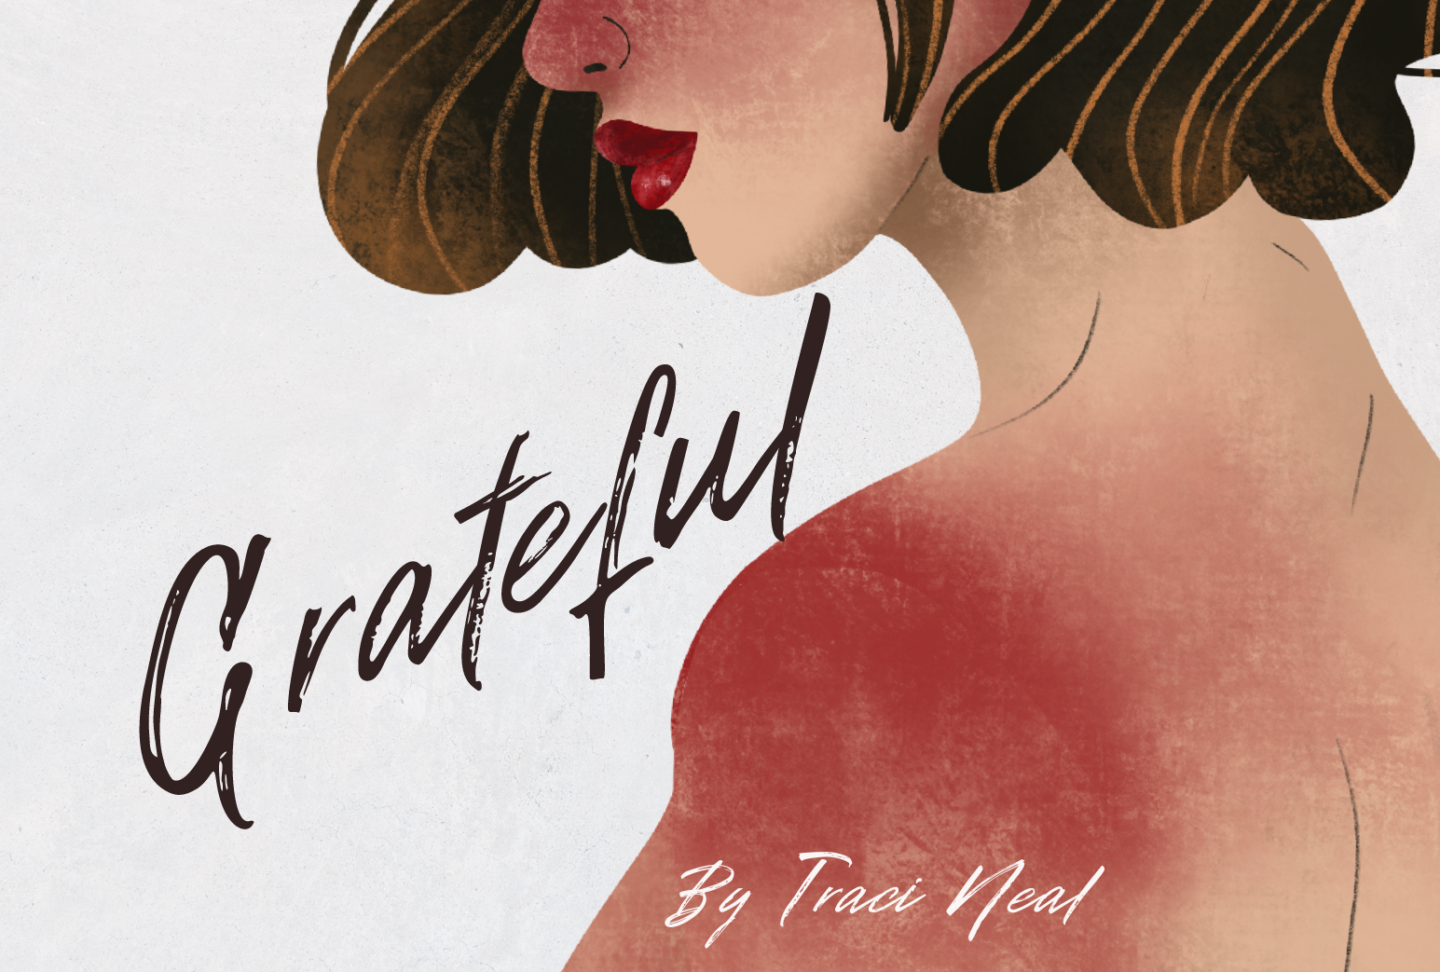 Grateful by Traci Neal